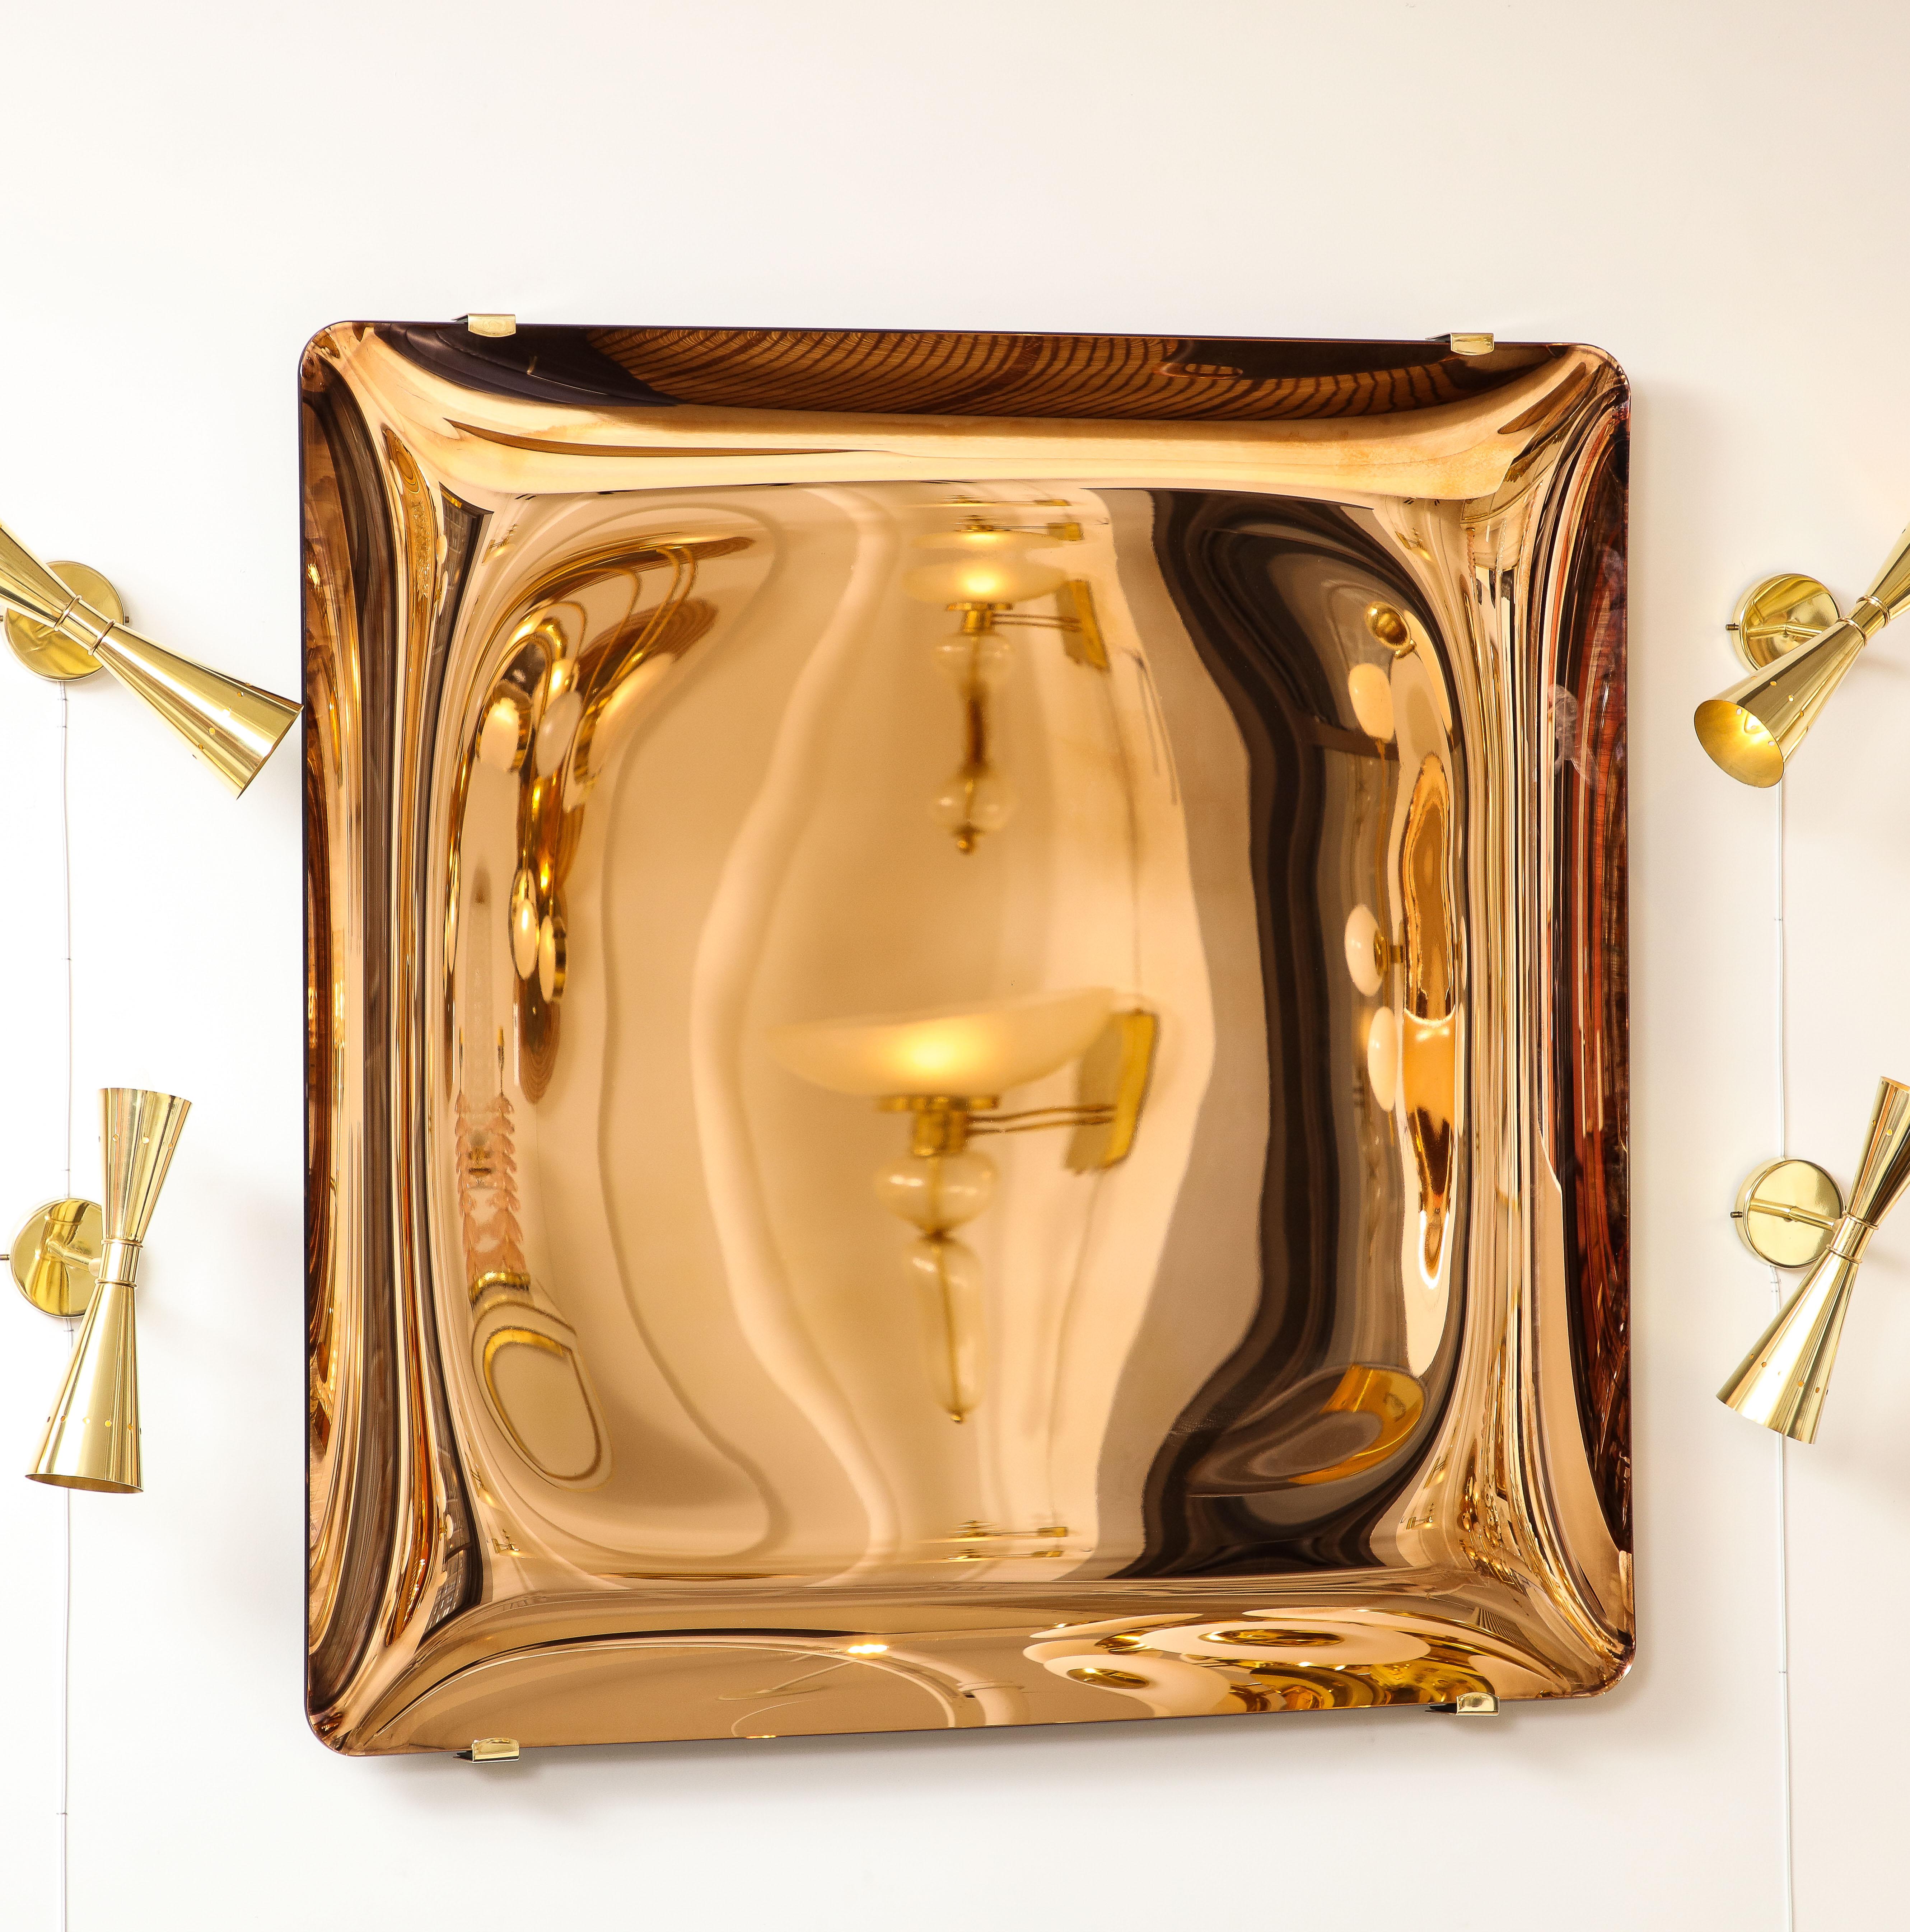 Large square frameless tinted glass in a rose gold color, thermoformed into a sculptural convex form and mirrored on back. Mounted on a steel with brass four arm structure that is attached to wall. Only brass tips show on front. Hand-casted in